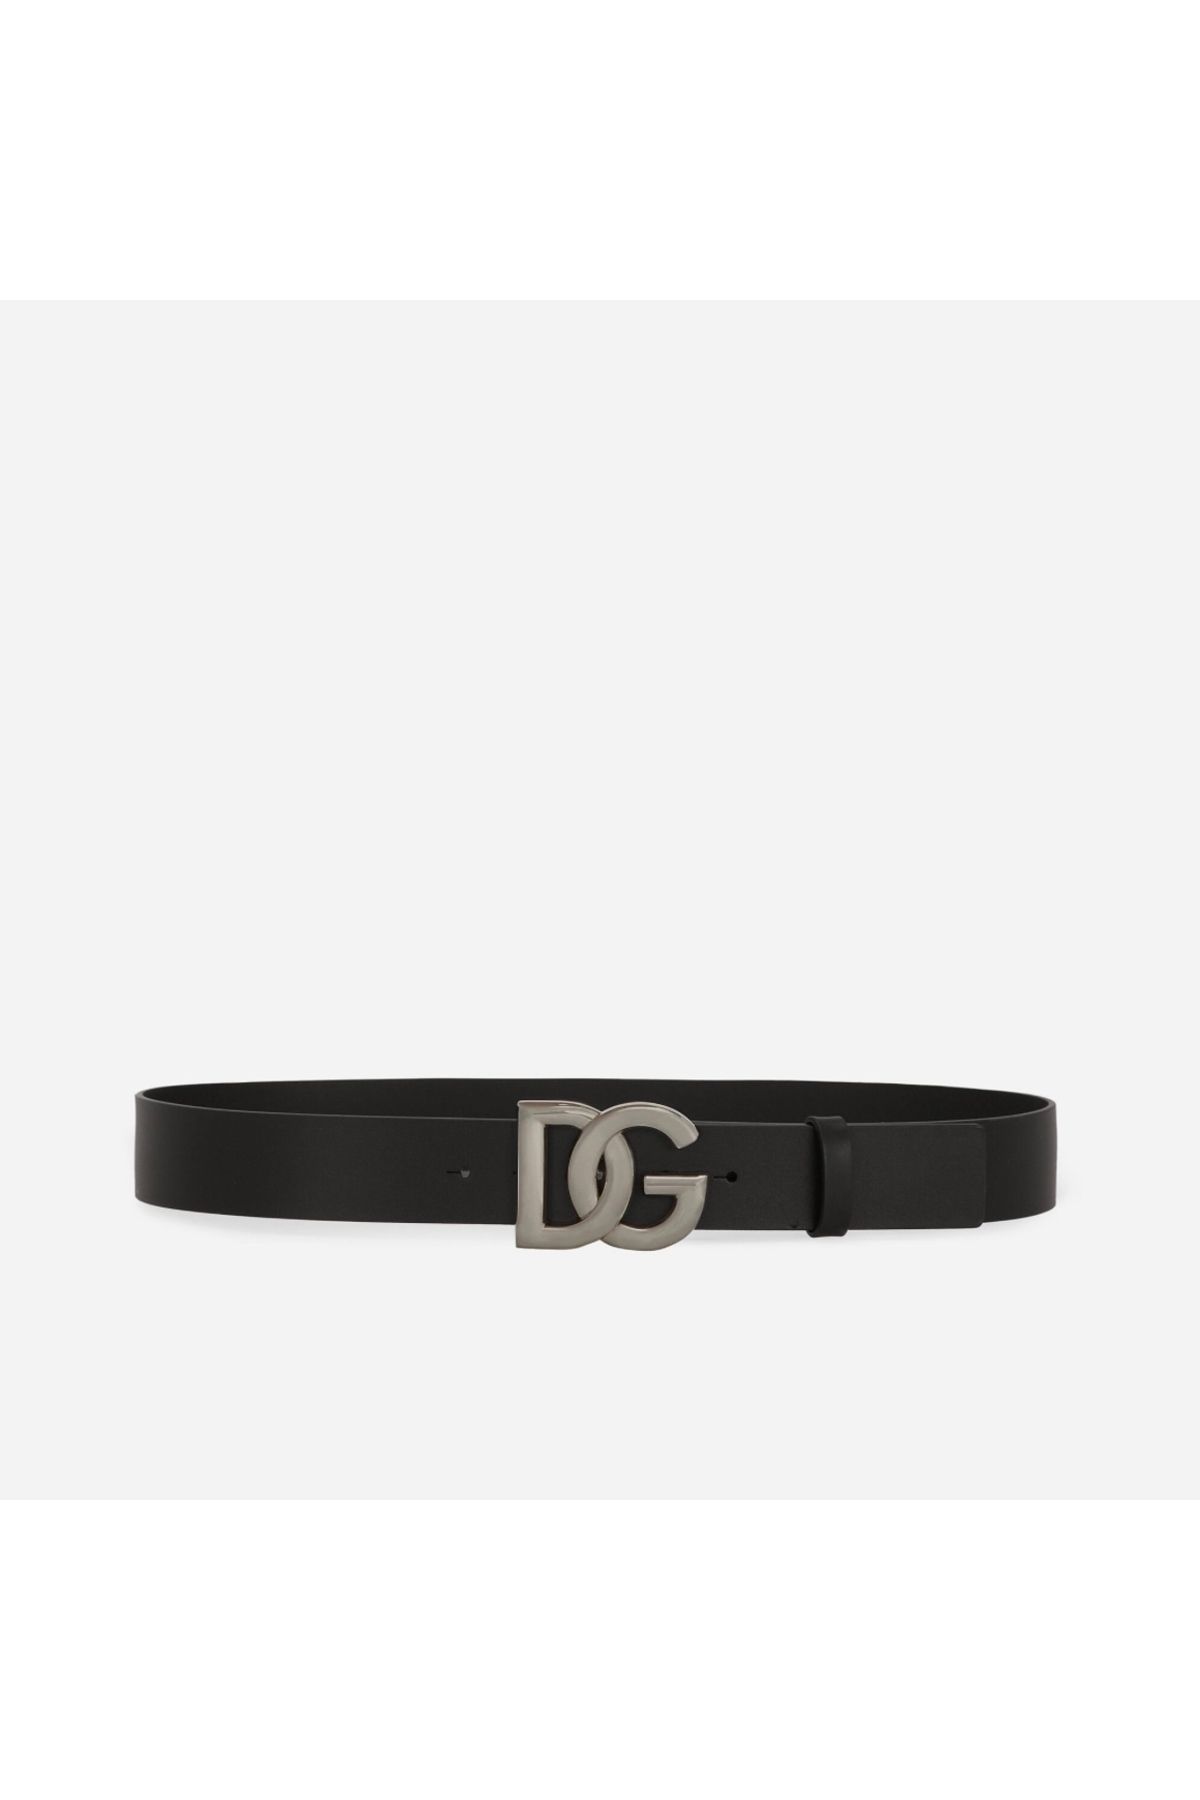 Dolce&Gabbana Lux leather belt with crossover DG logo buckle